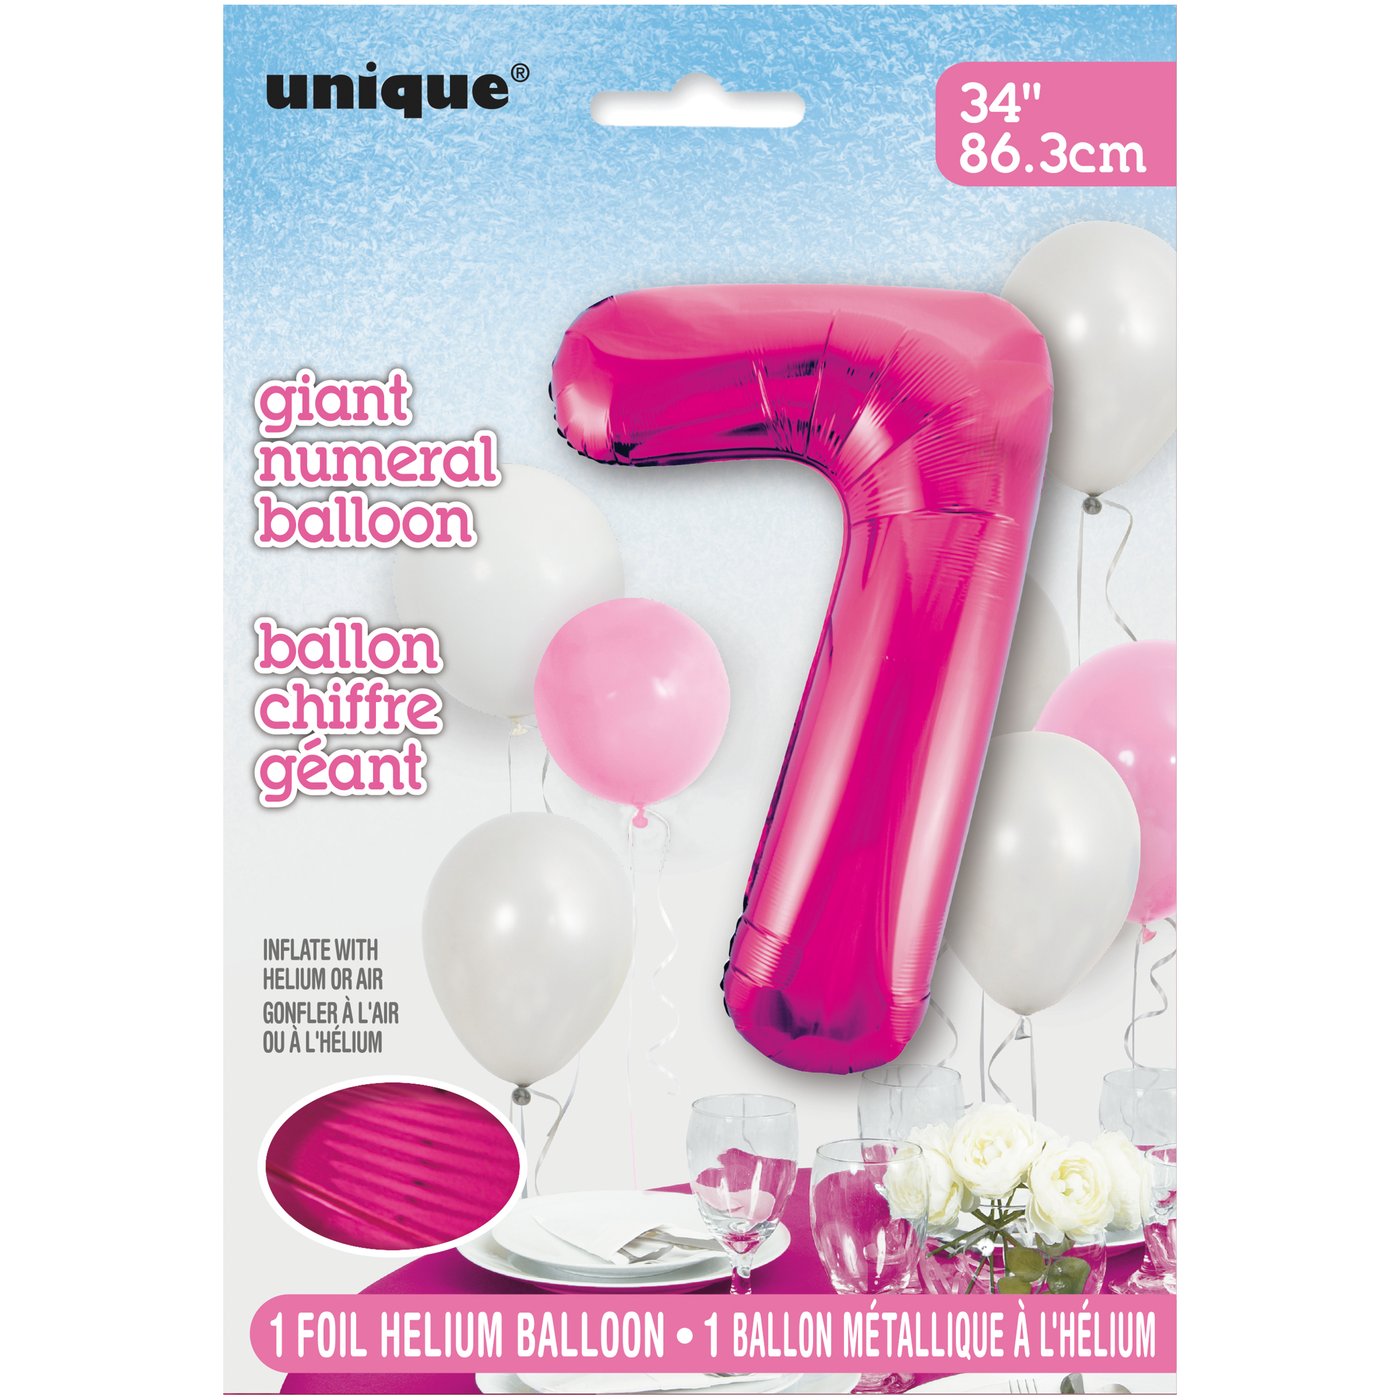 Foil Giant Helium Number Balloon 86Cm Pink - 7